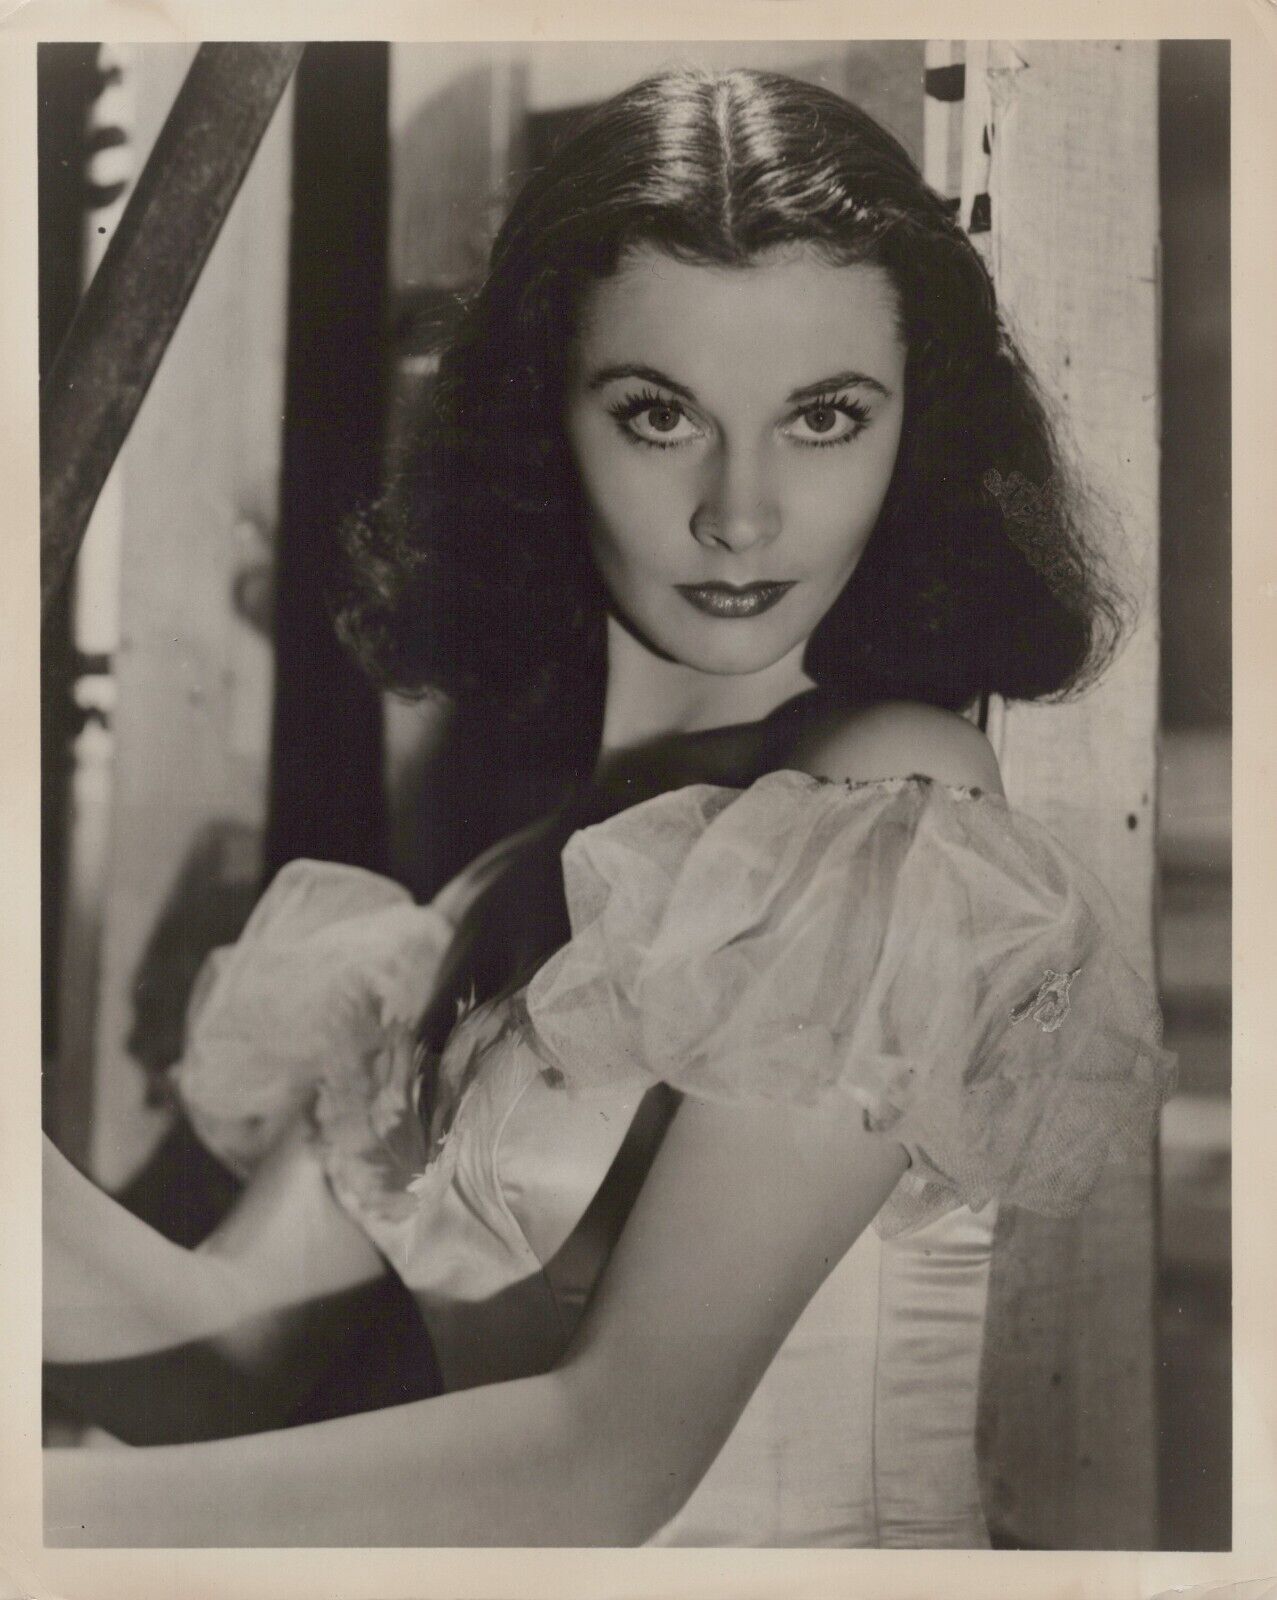 HOLLYWOOD BEAUTY Vivien Leigh BACKSTAGE STUNNING PORTRAIT 1950s ORIG Photo 424